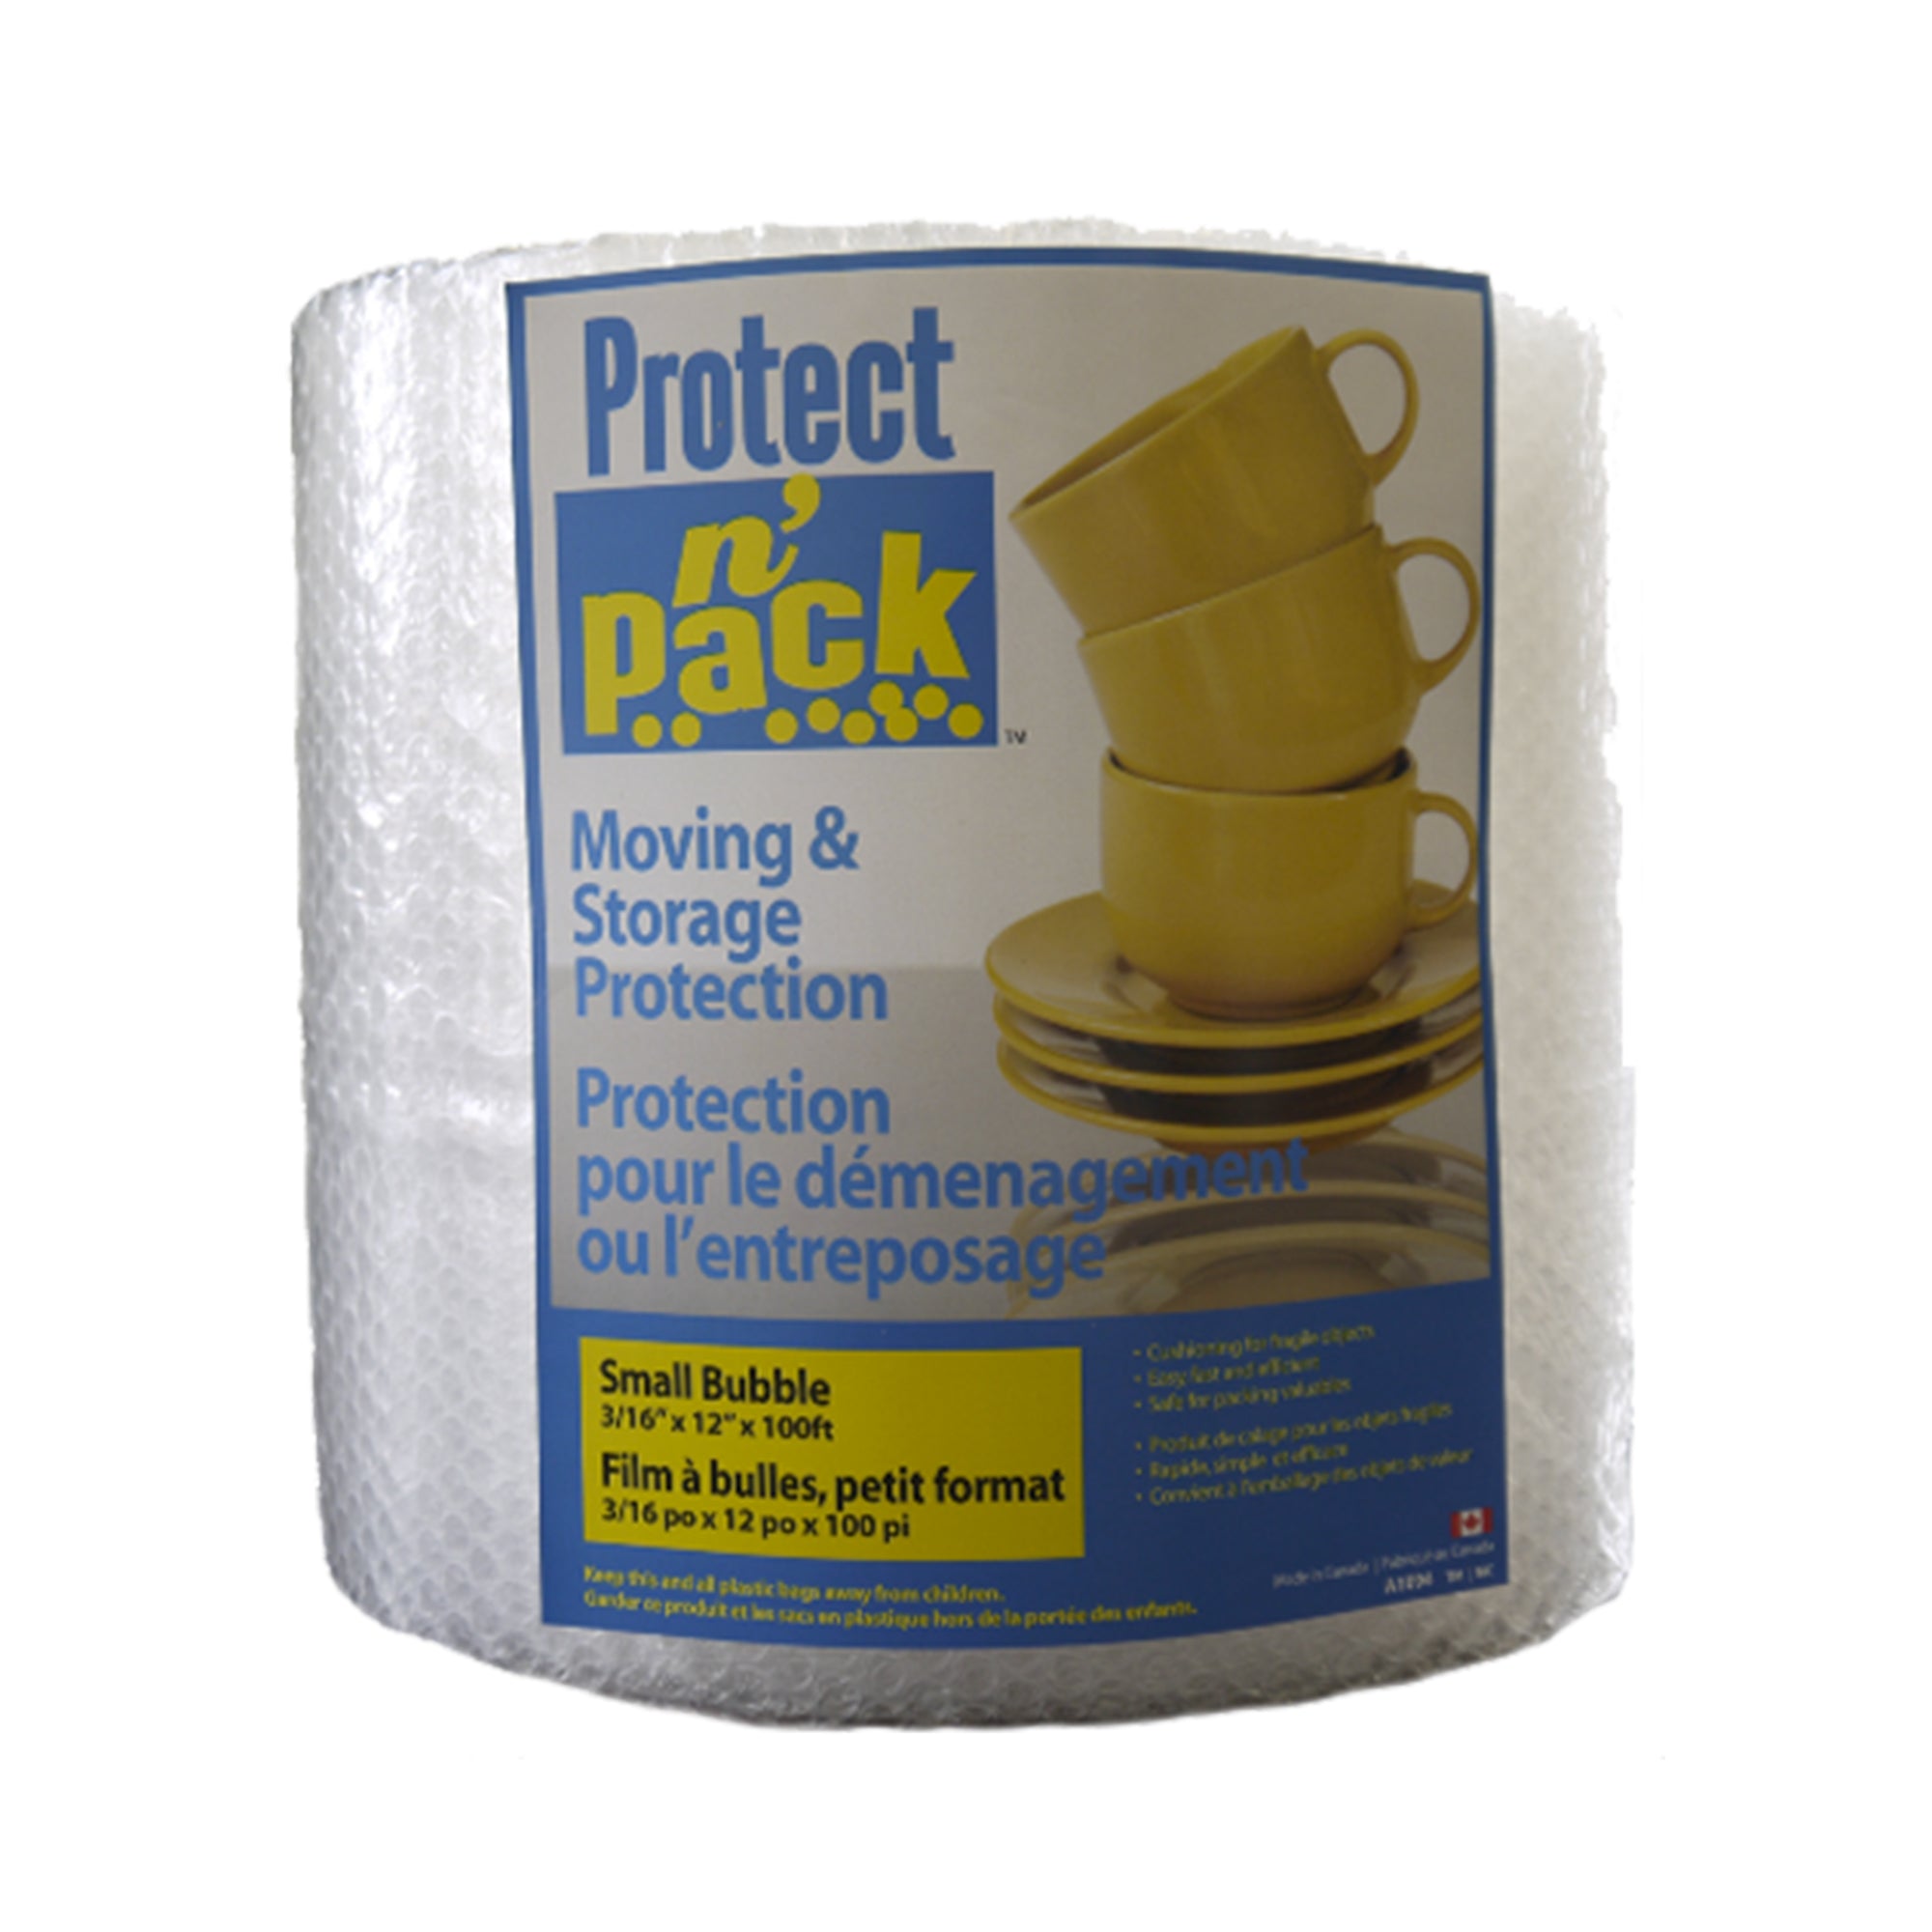 Protect n' Pack Bubble Roll - Small Bubble 12in x 100ft